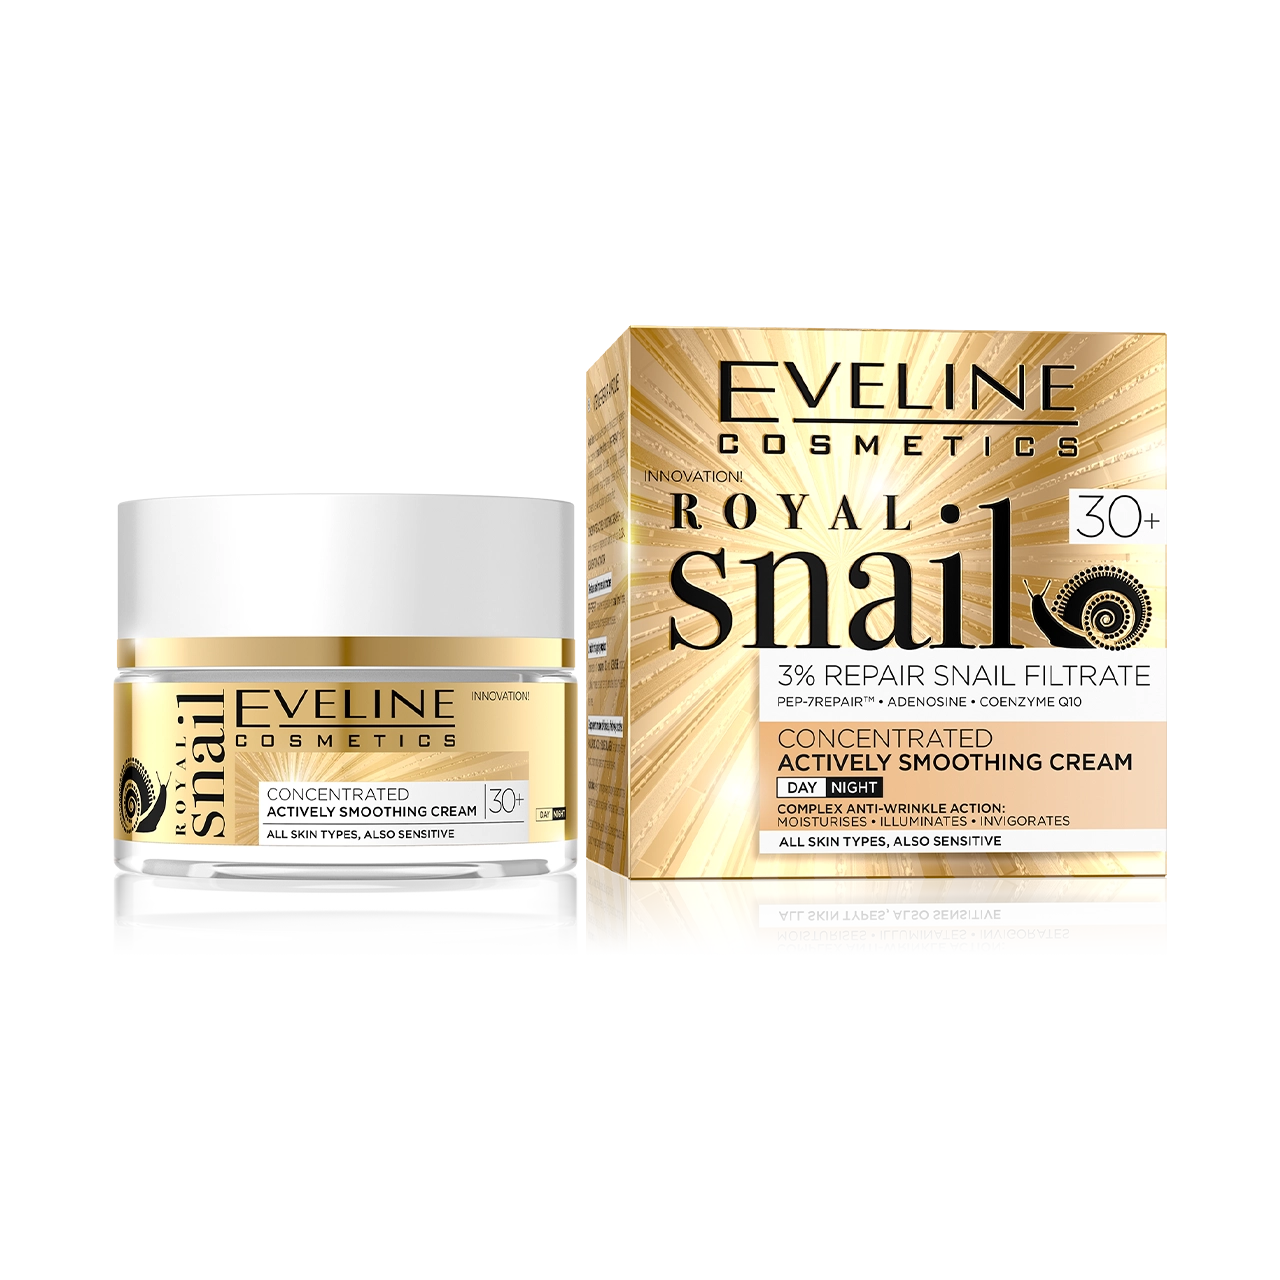 207-5901761980950- Eveline Cosmetics Royal Snail Concentrated Activly Smoothing Cream 30+ 50ml